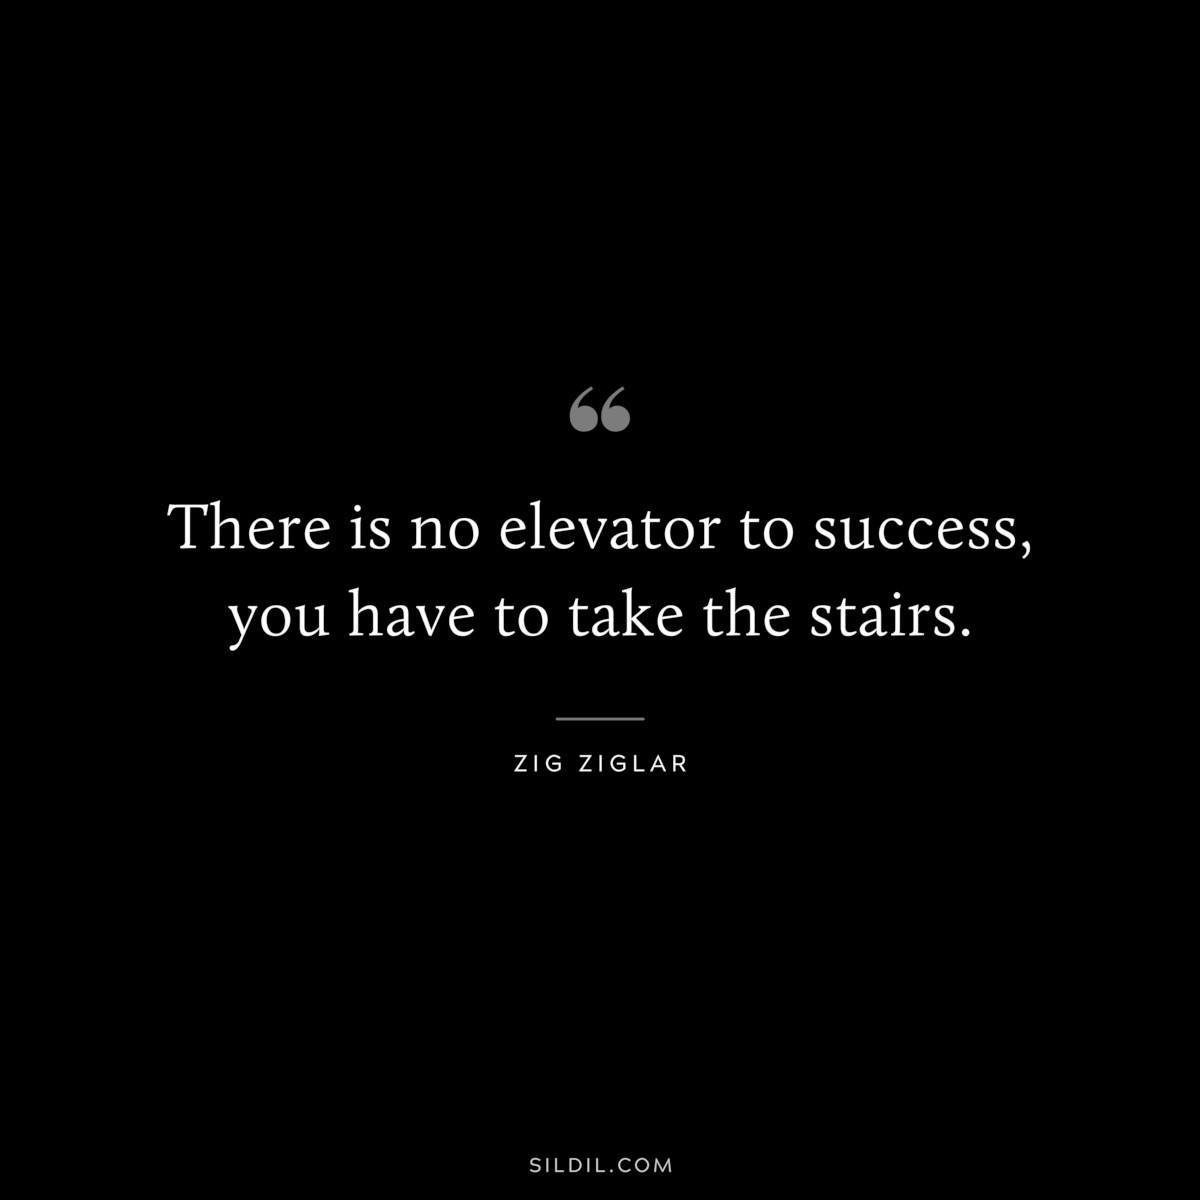 There is no elevator to success, you have to take the stairs. ― Zig Ziglar